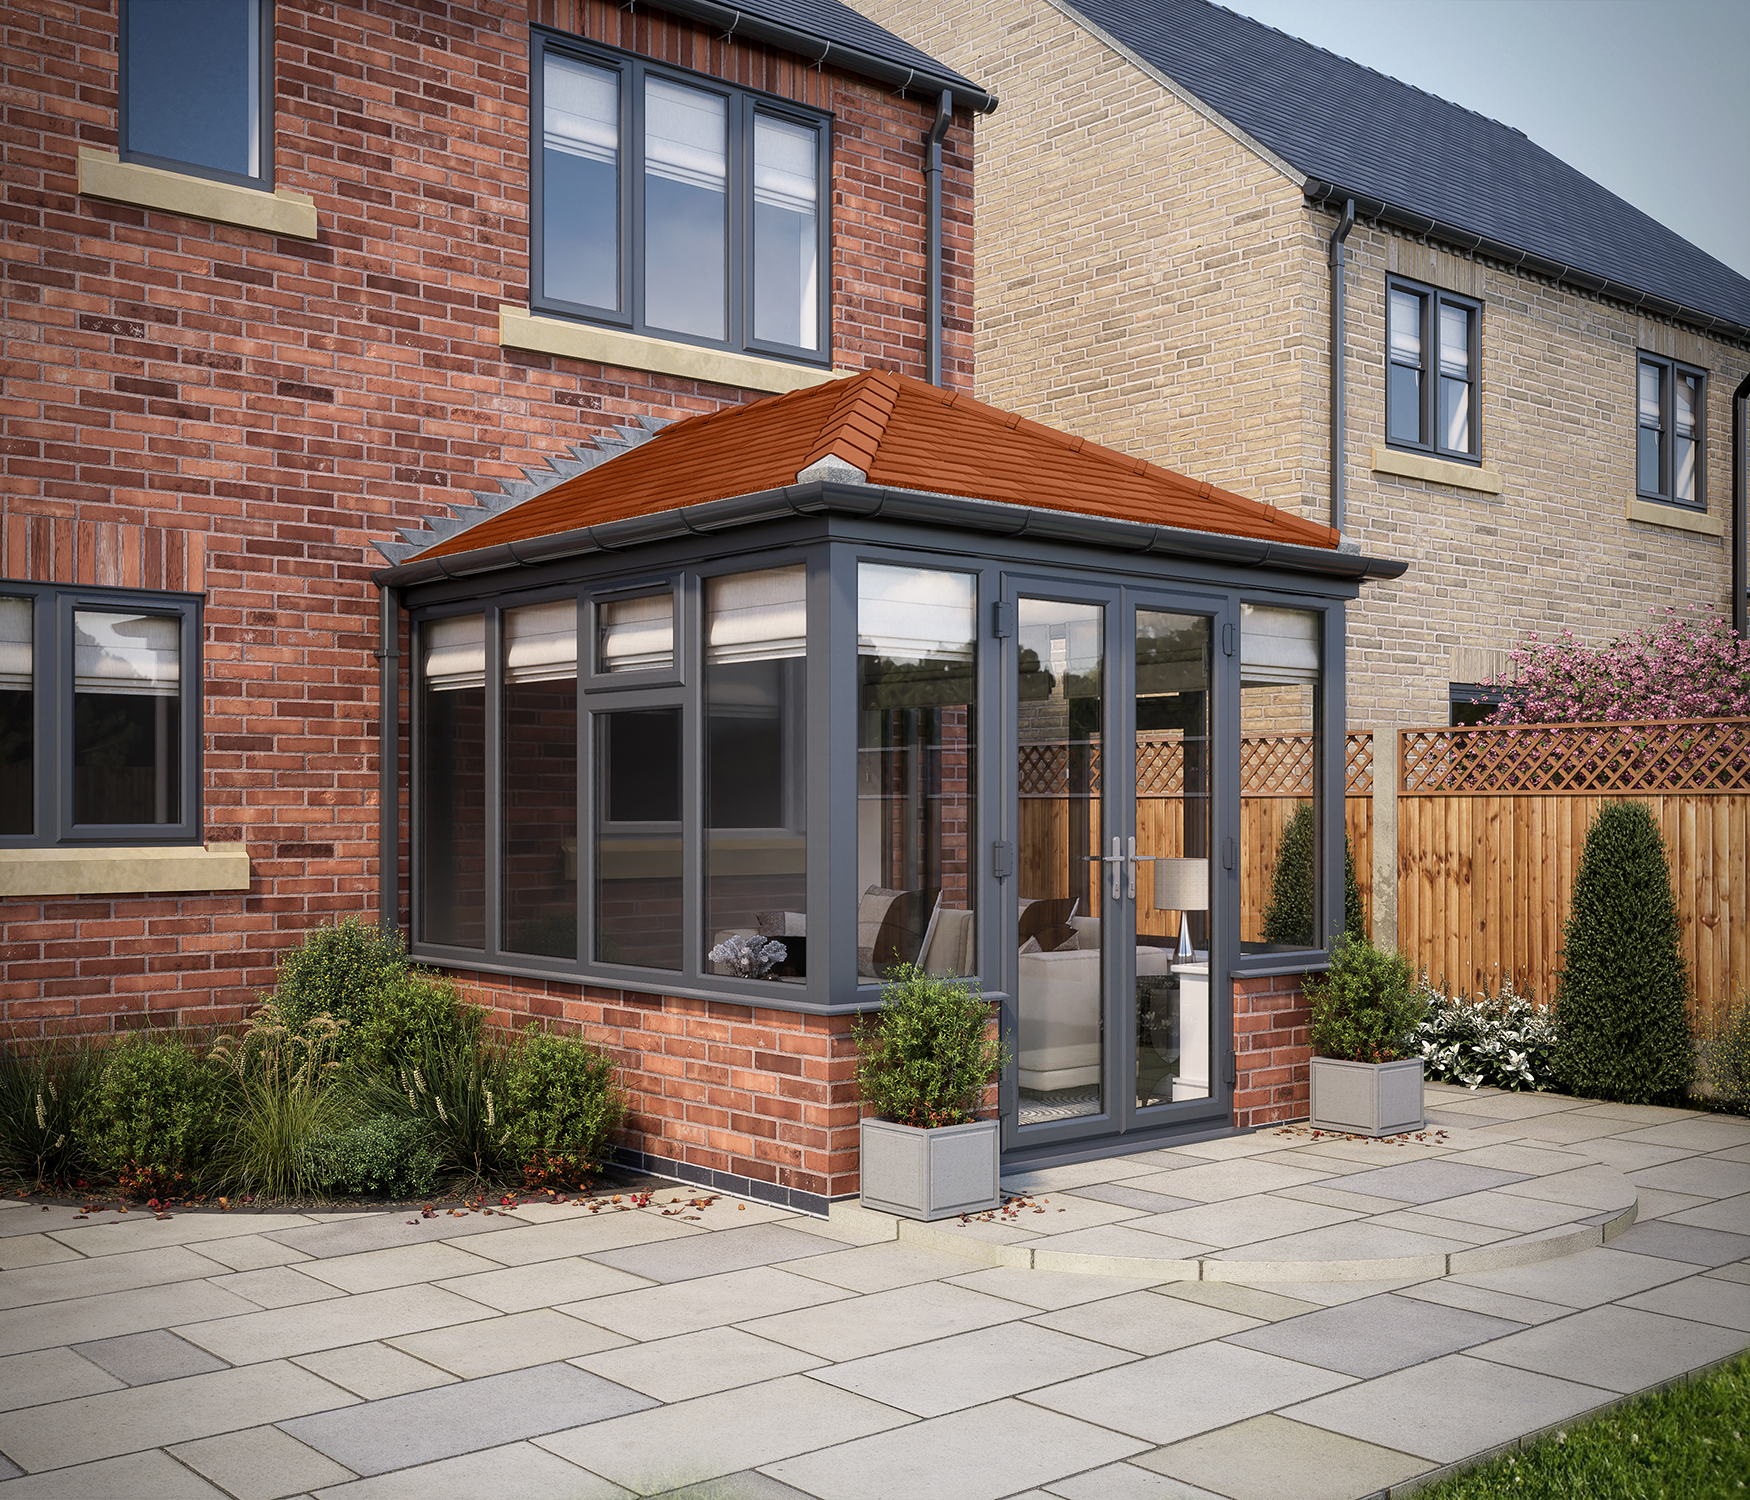 Image of SOLid Roof Edwardian Conservatory Grey Frames Dwarf Wall with Rustic Terracotta Tiles - 10 x 10ft